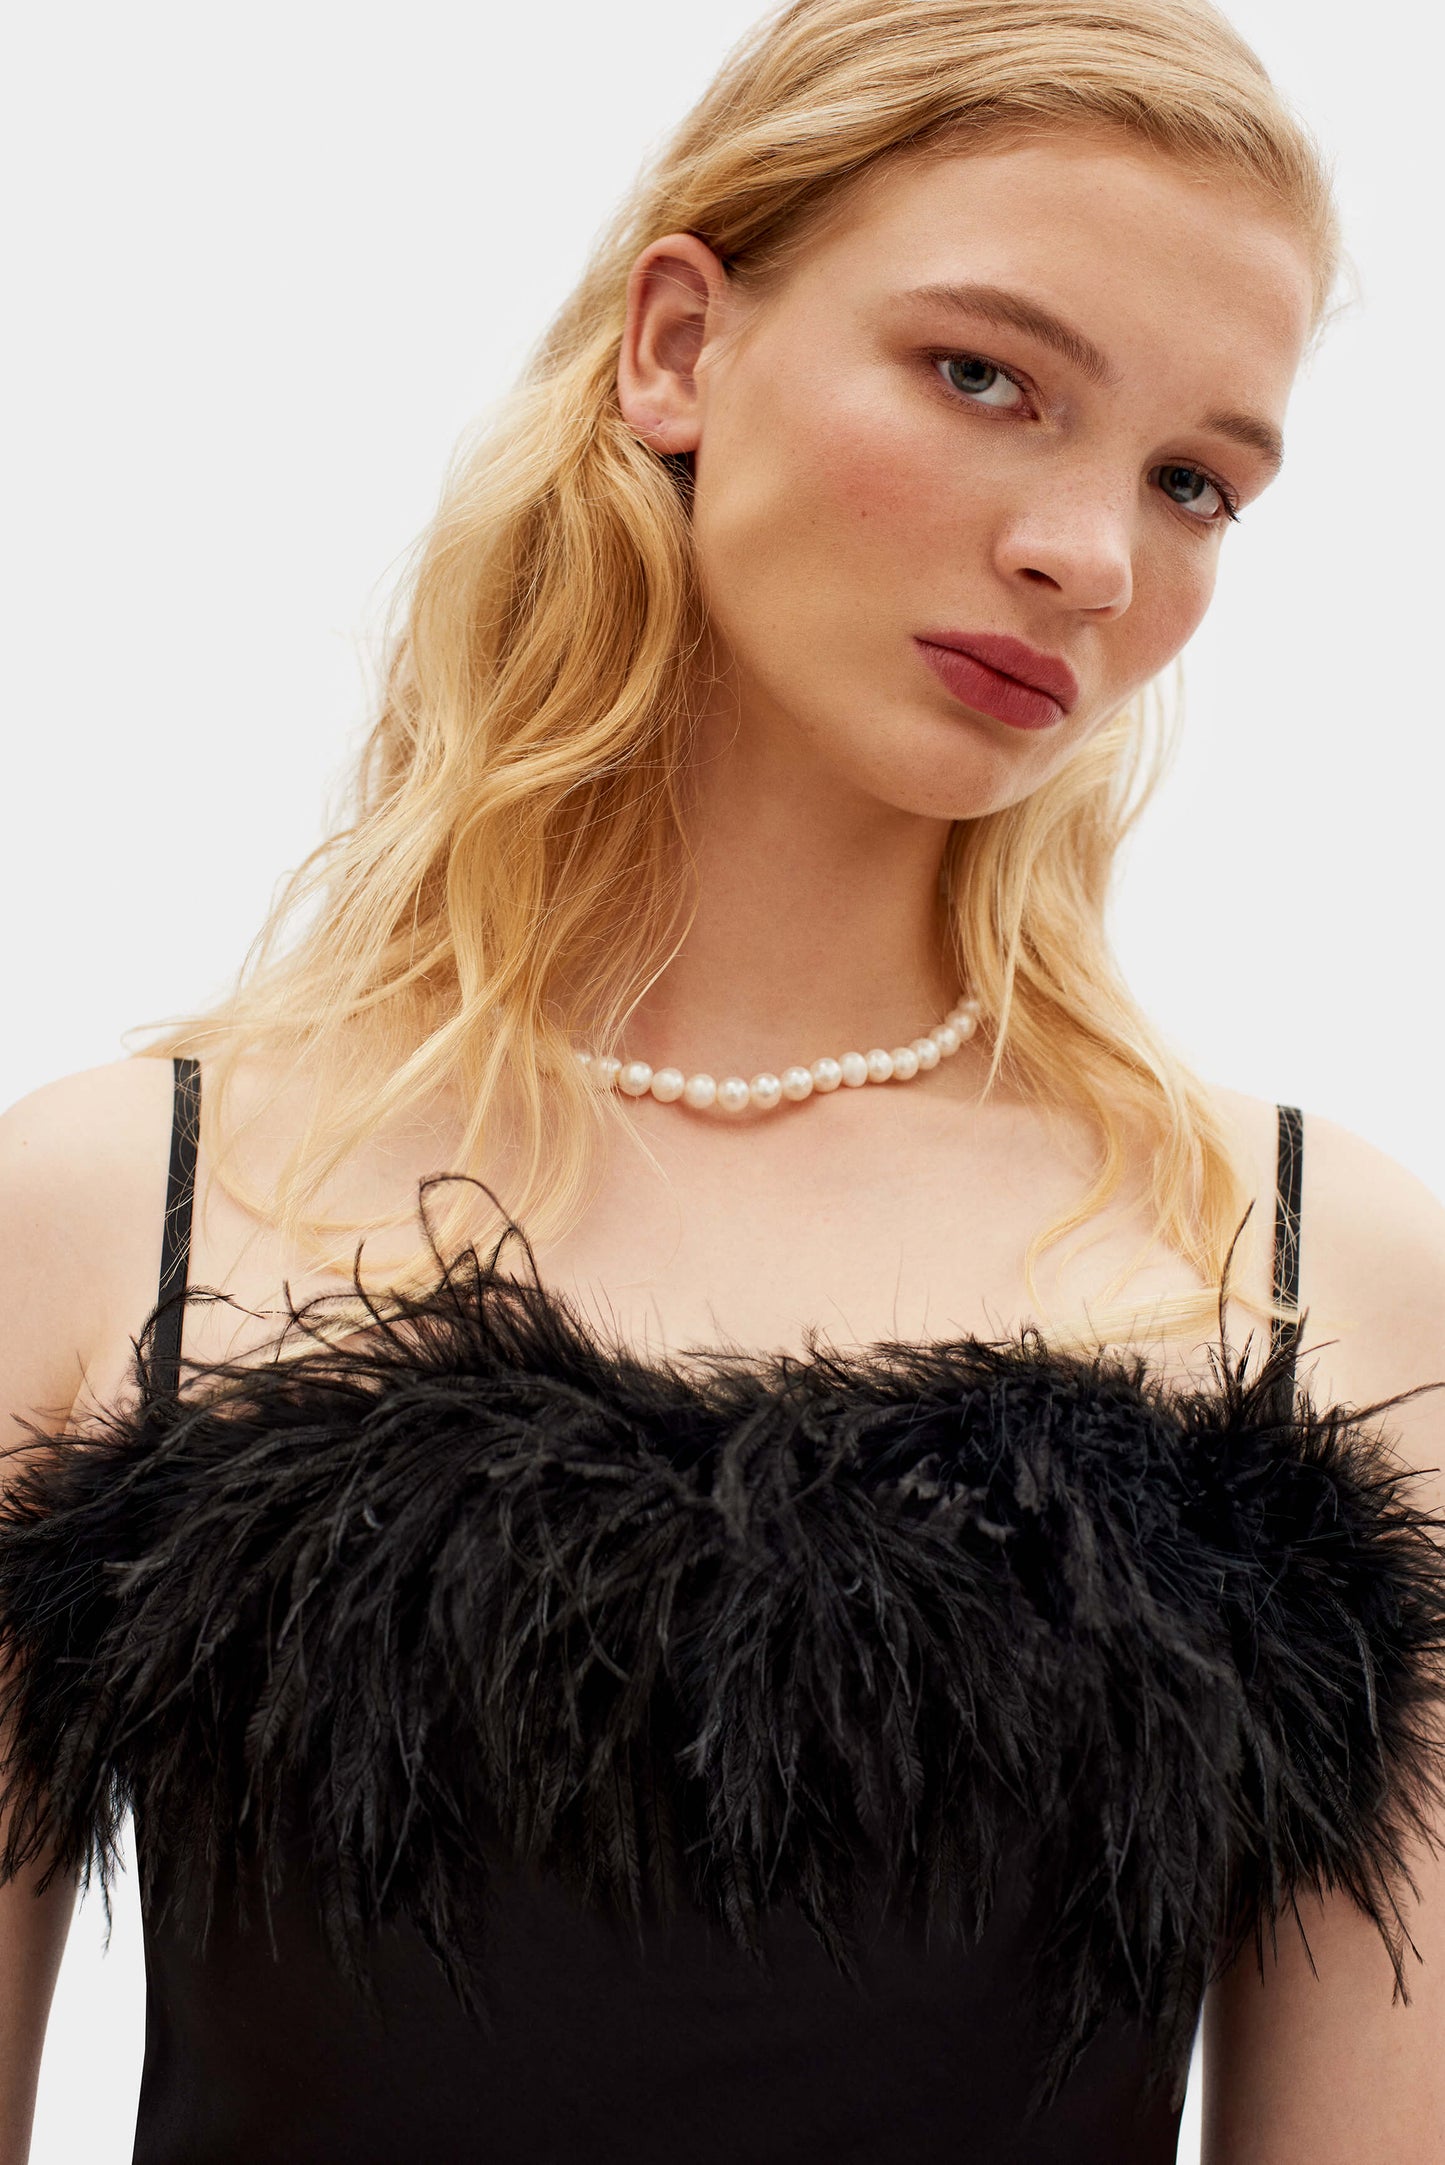 Boheme Slip Dress with Feathers in Black